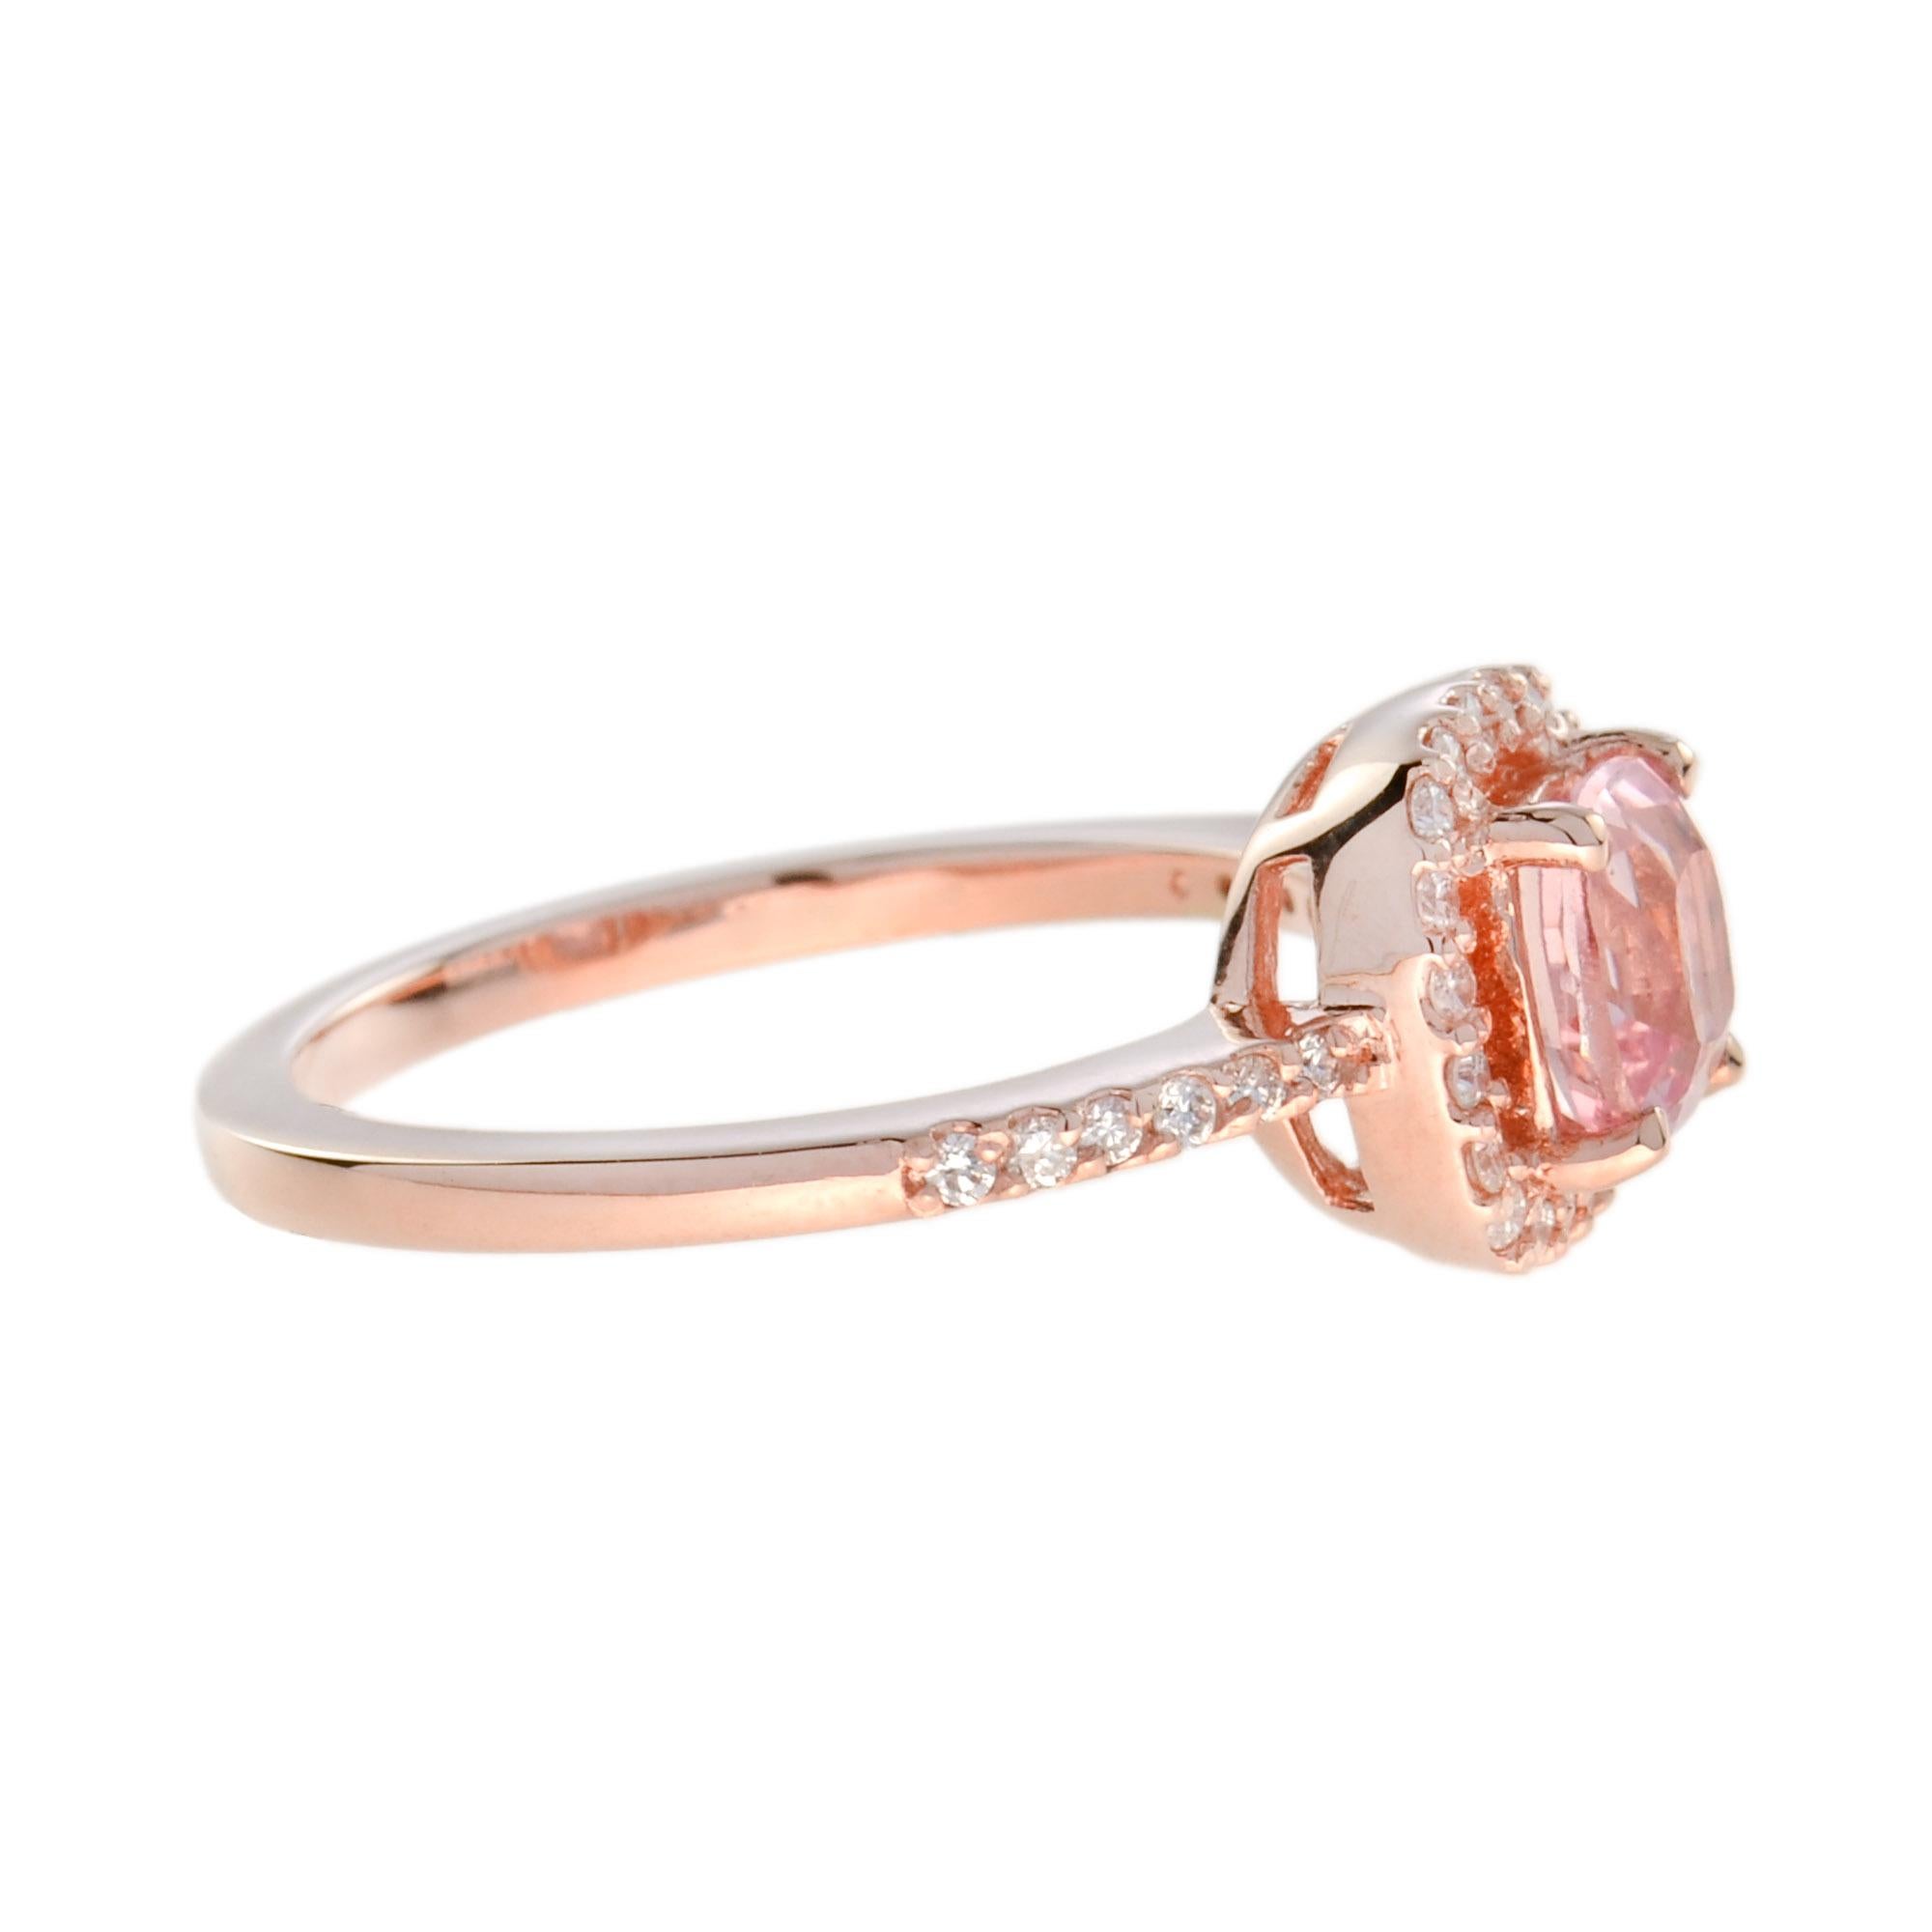 For Sale:  Halona Cushion Morganite and Diamond Halo Ring in 14K Rose Gold 4